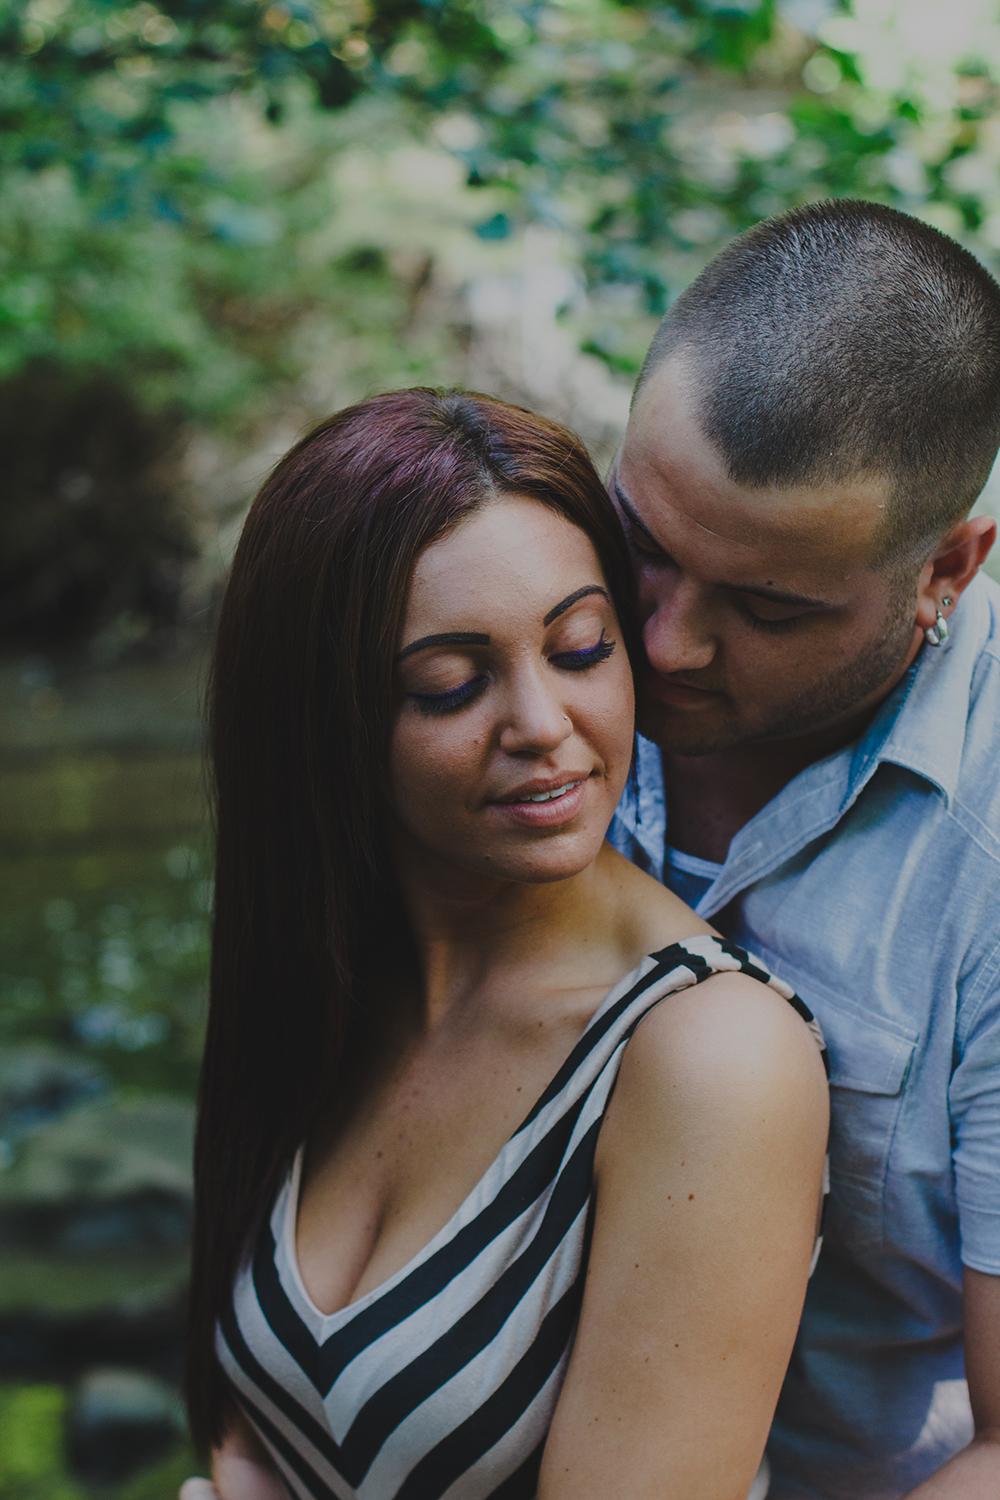  Outdoor engagement photography at Corbett's Glen Nature Park in Rochester, NY. 